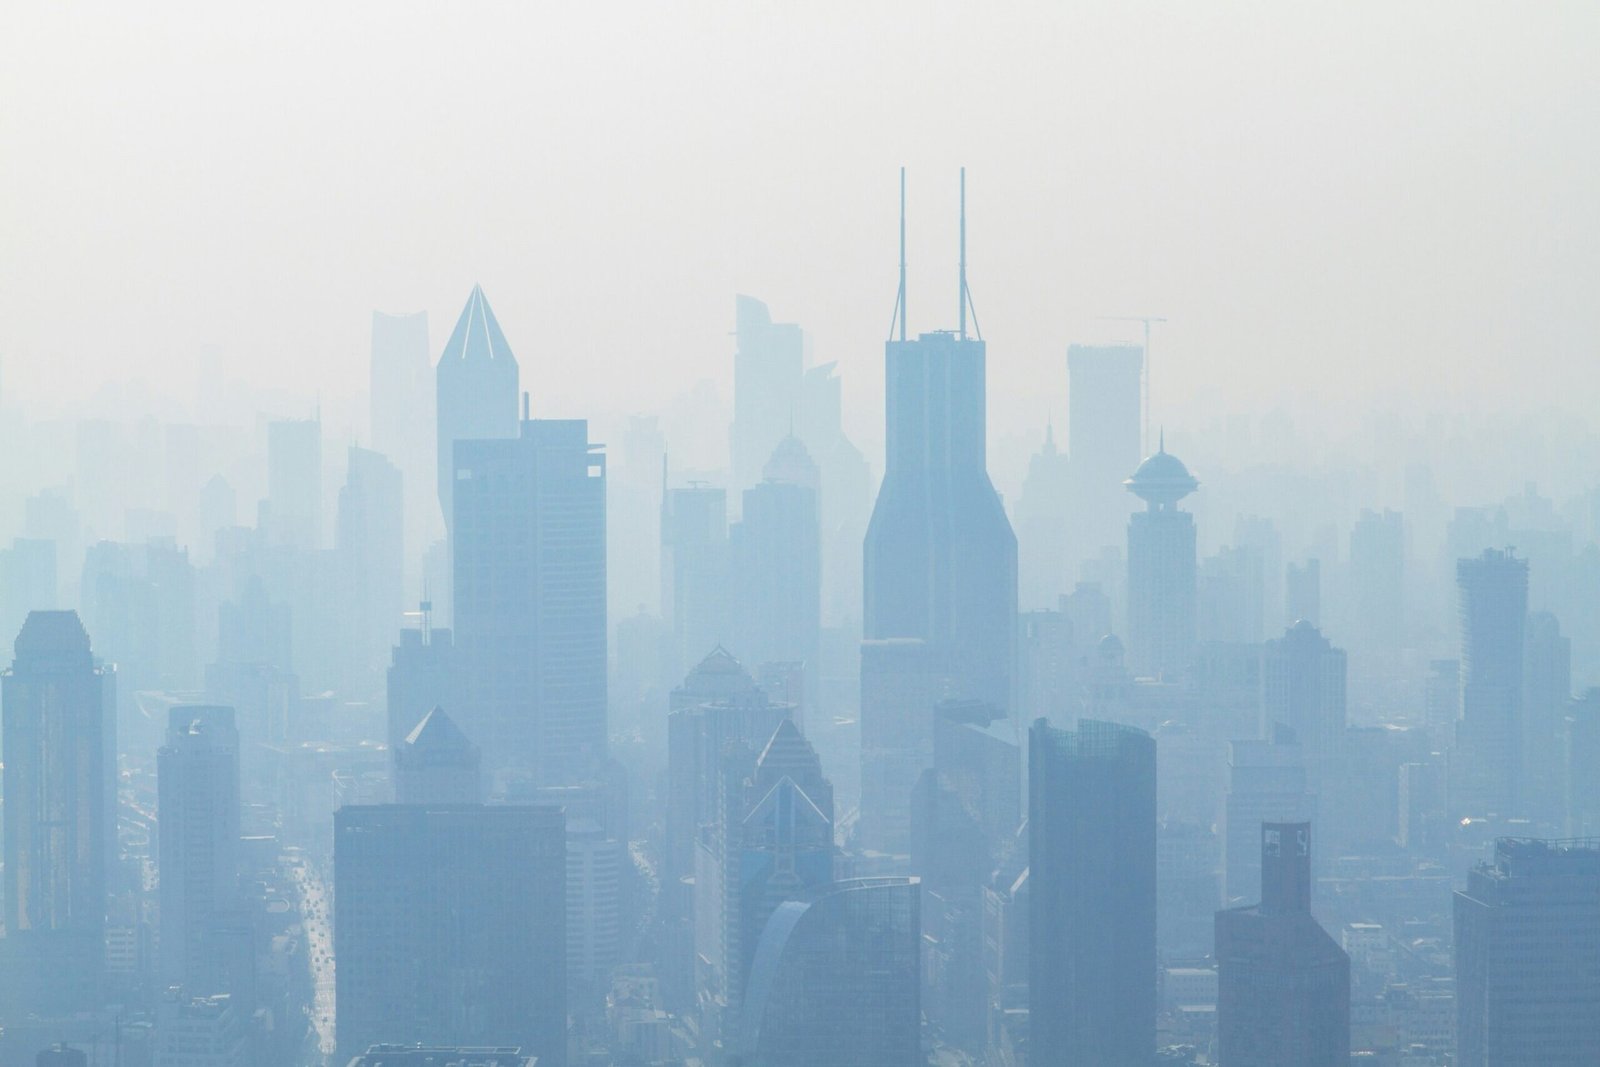 New research links air pollution exposure during childhood directly to adult bronchitis symptoms